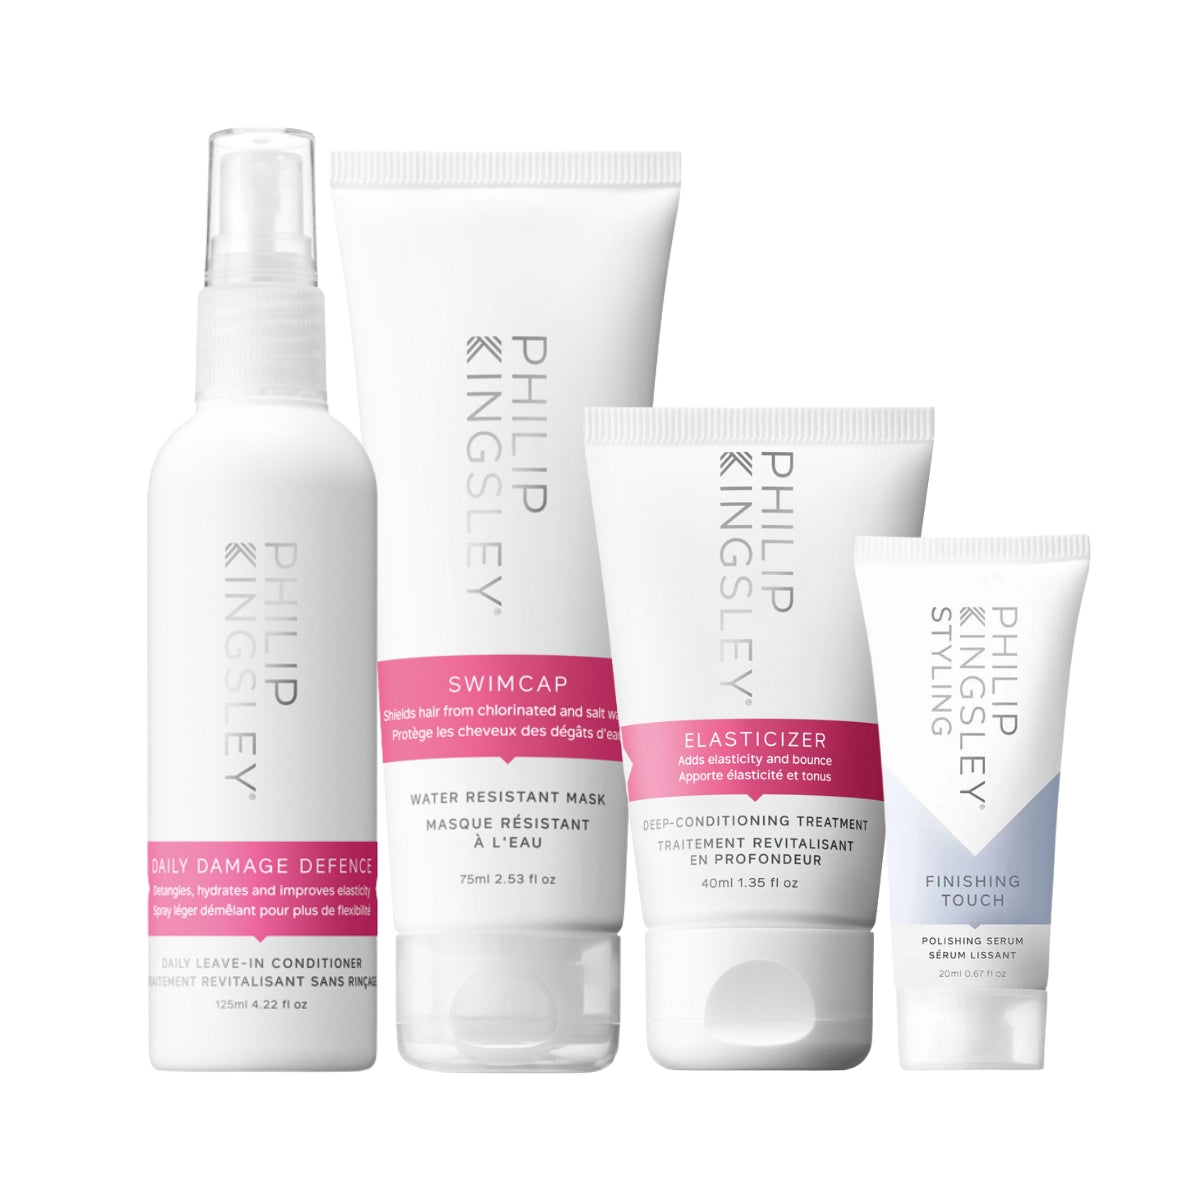 Philip Kingsley Holiday-Proof Hair Care Travel Collection.